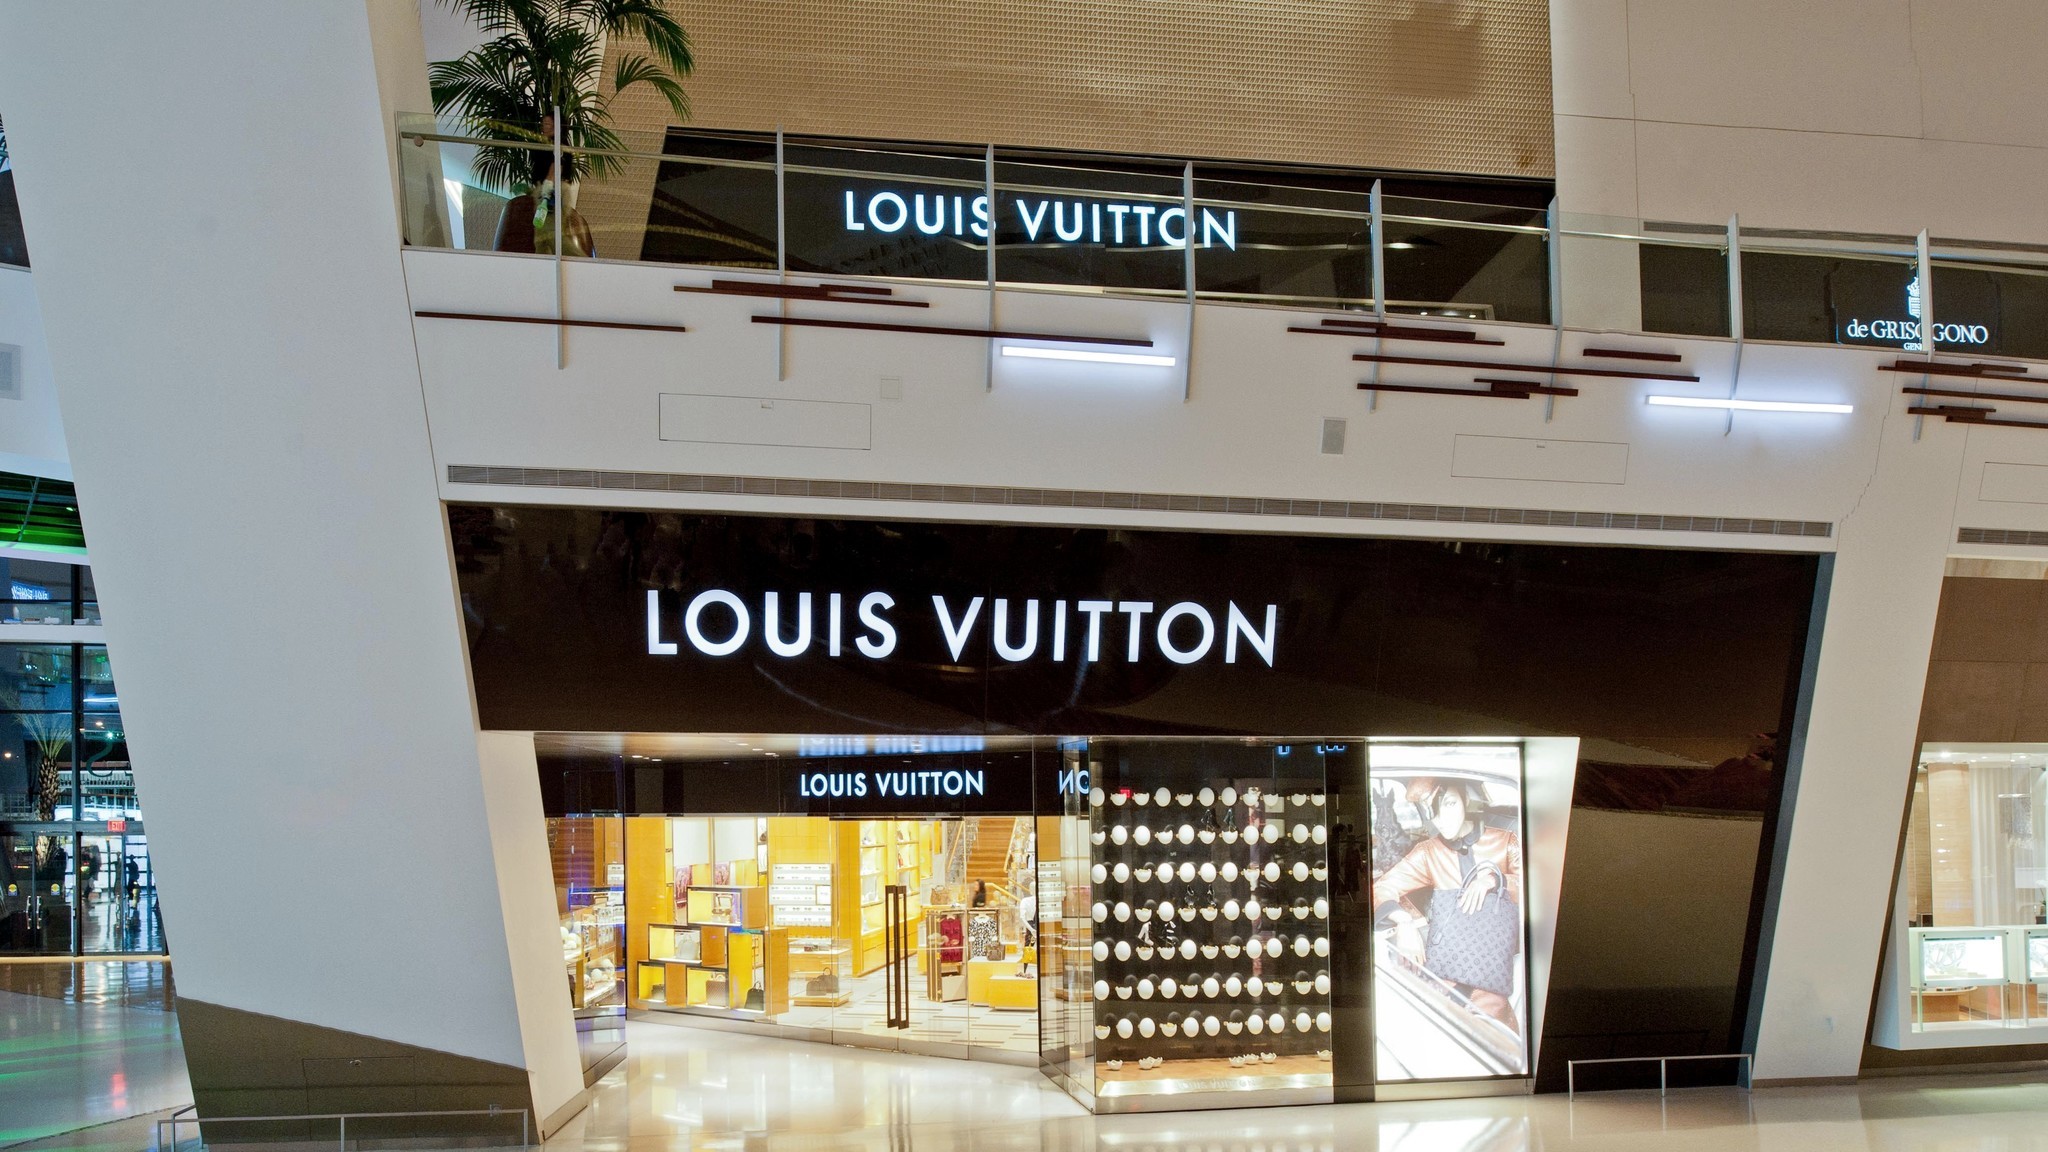 One of the original tenants at Crystals, Louis Vuitton still has a presence with its expansive store. It’s one of the French retailer’s seven locations in Las Vegas.